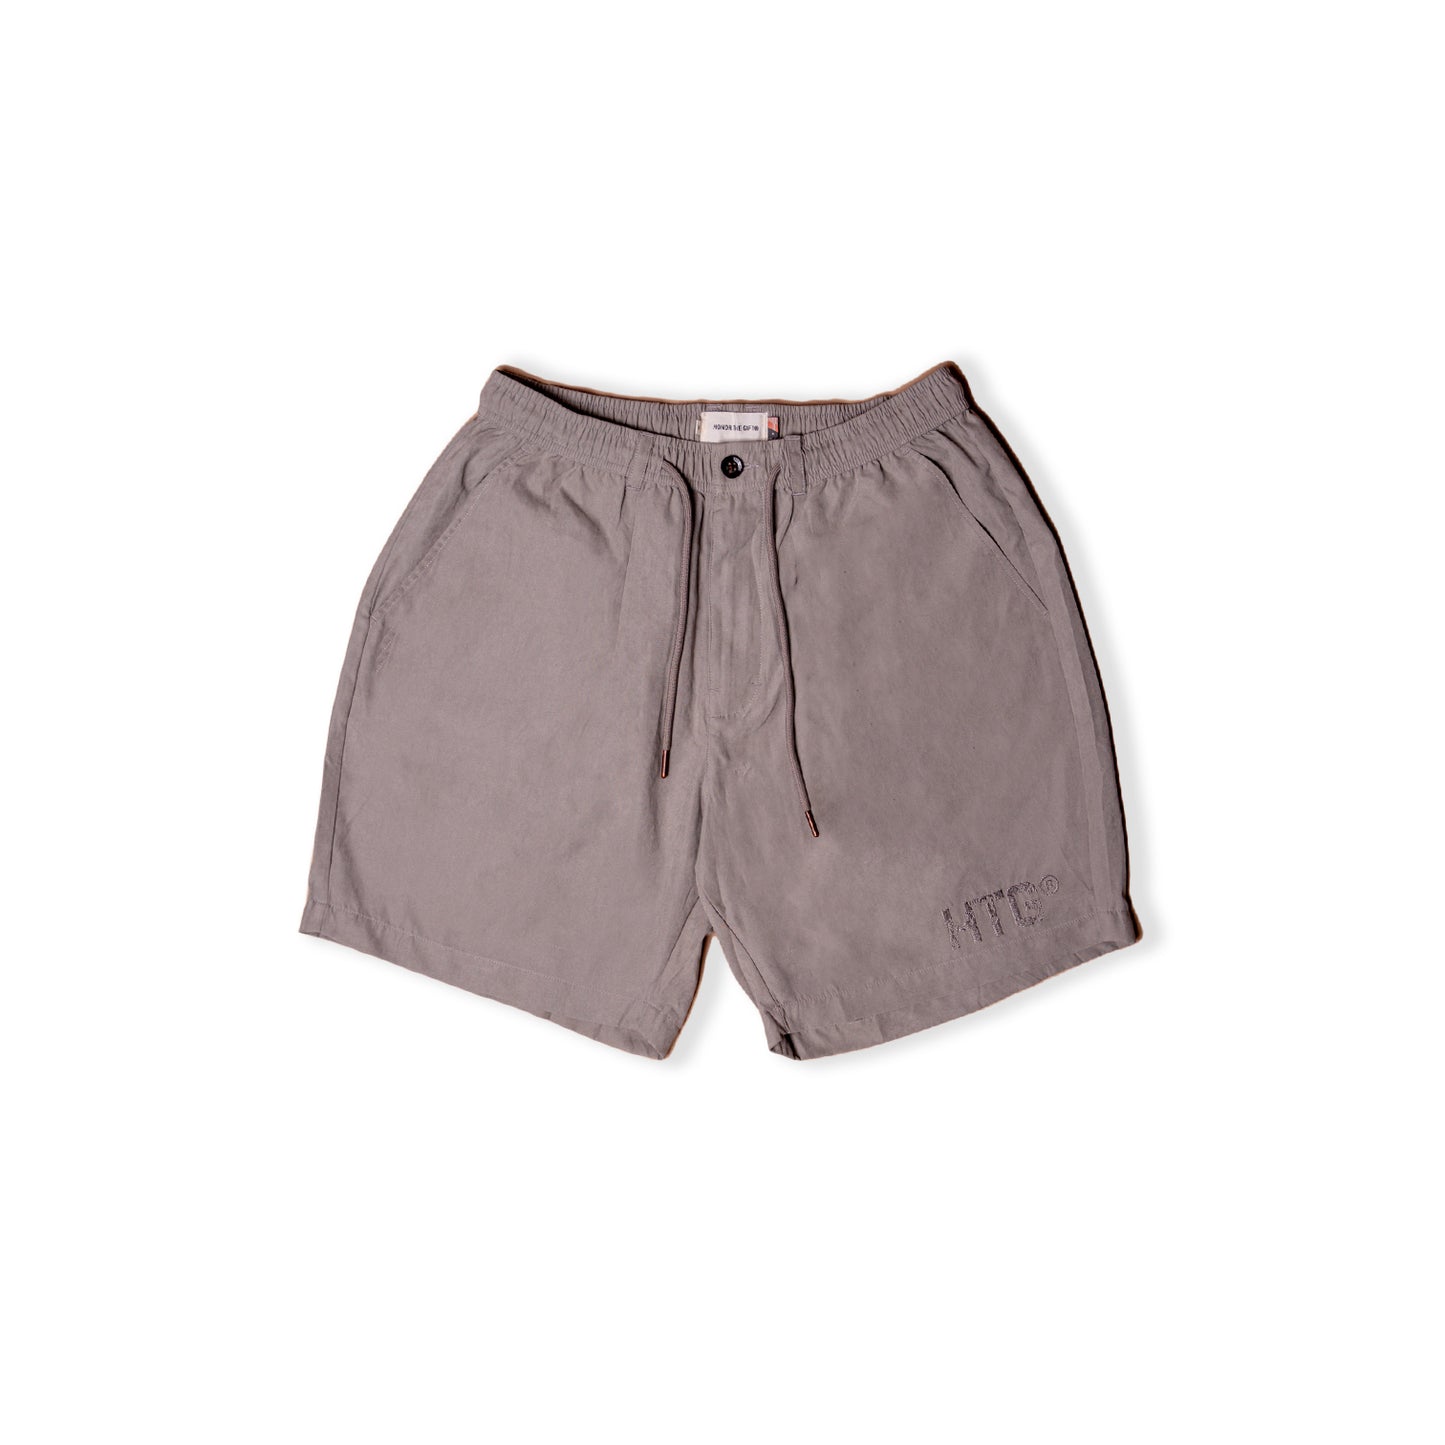 Men's Honor the Gift "Year Round" Poly Shorts - Grey